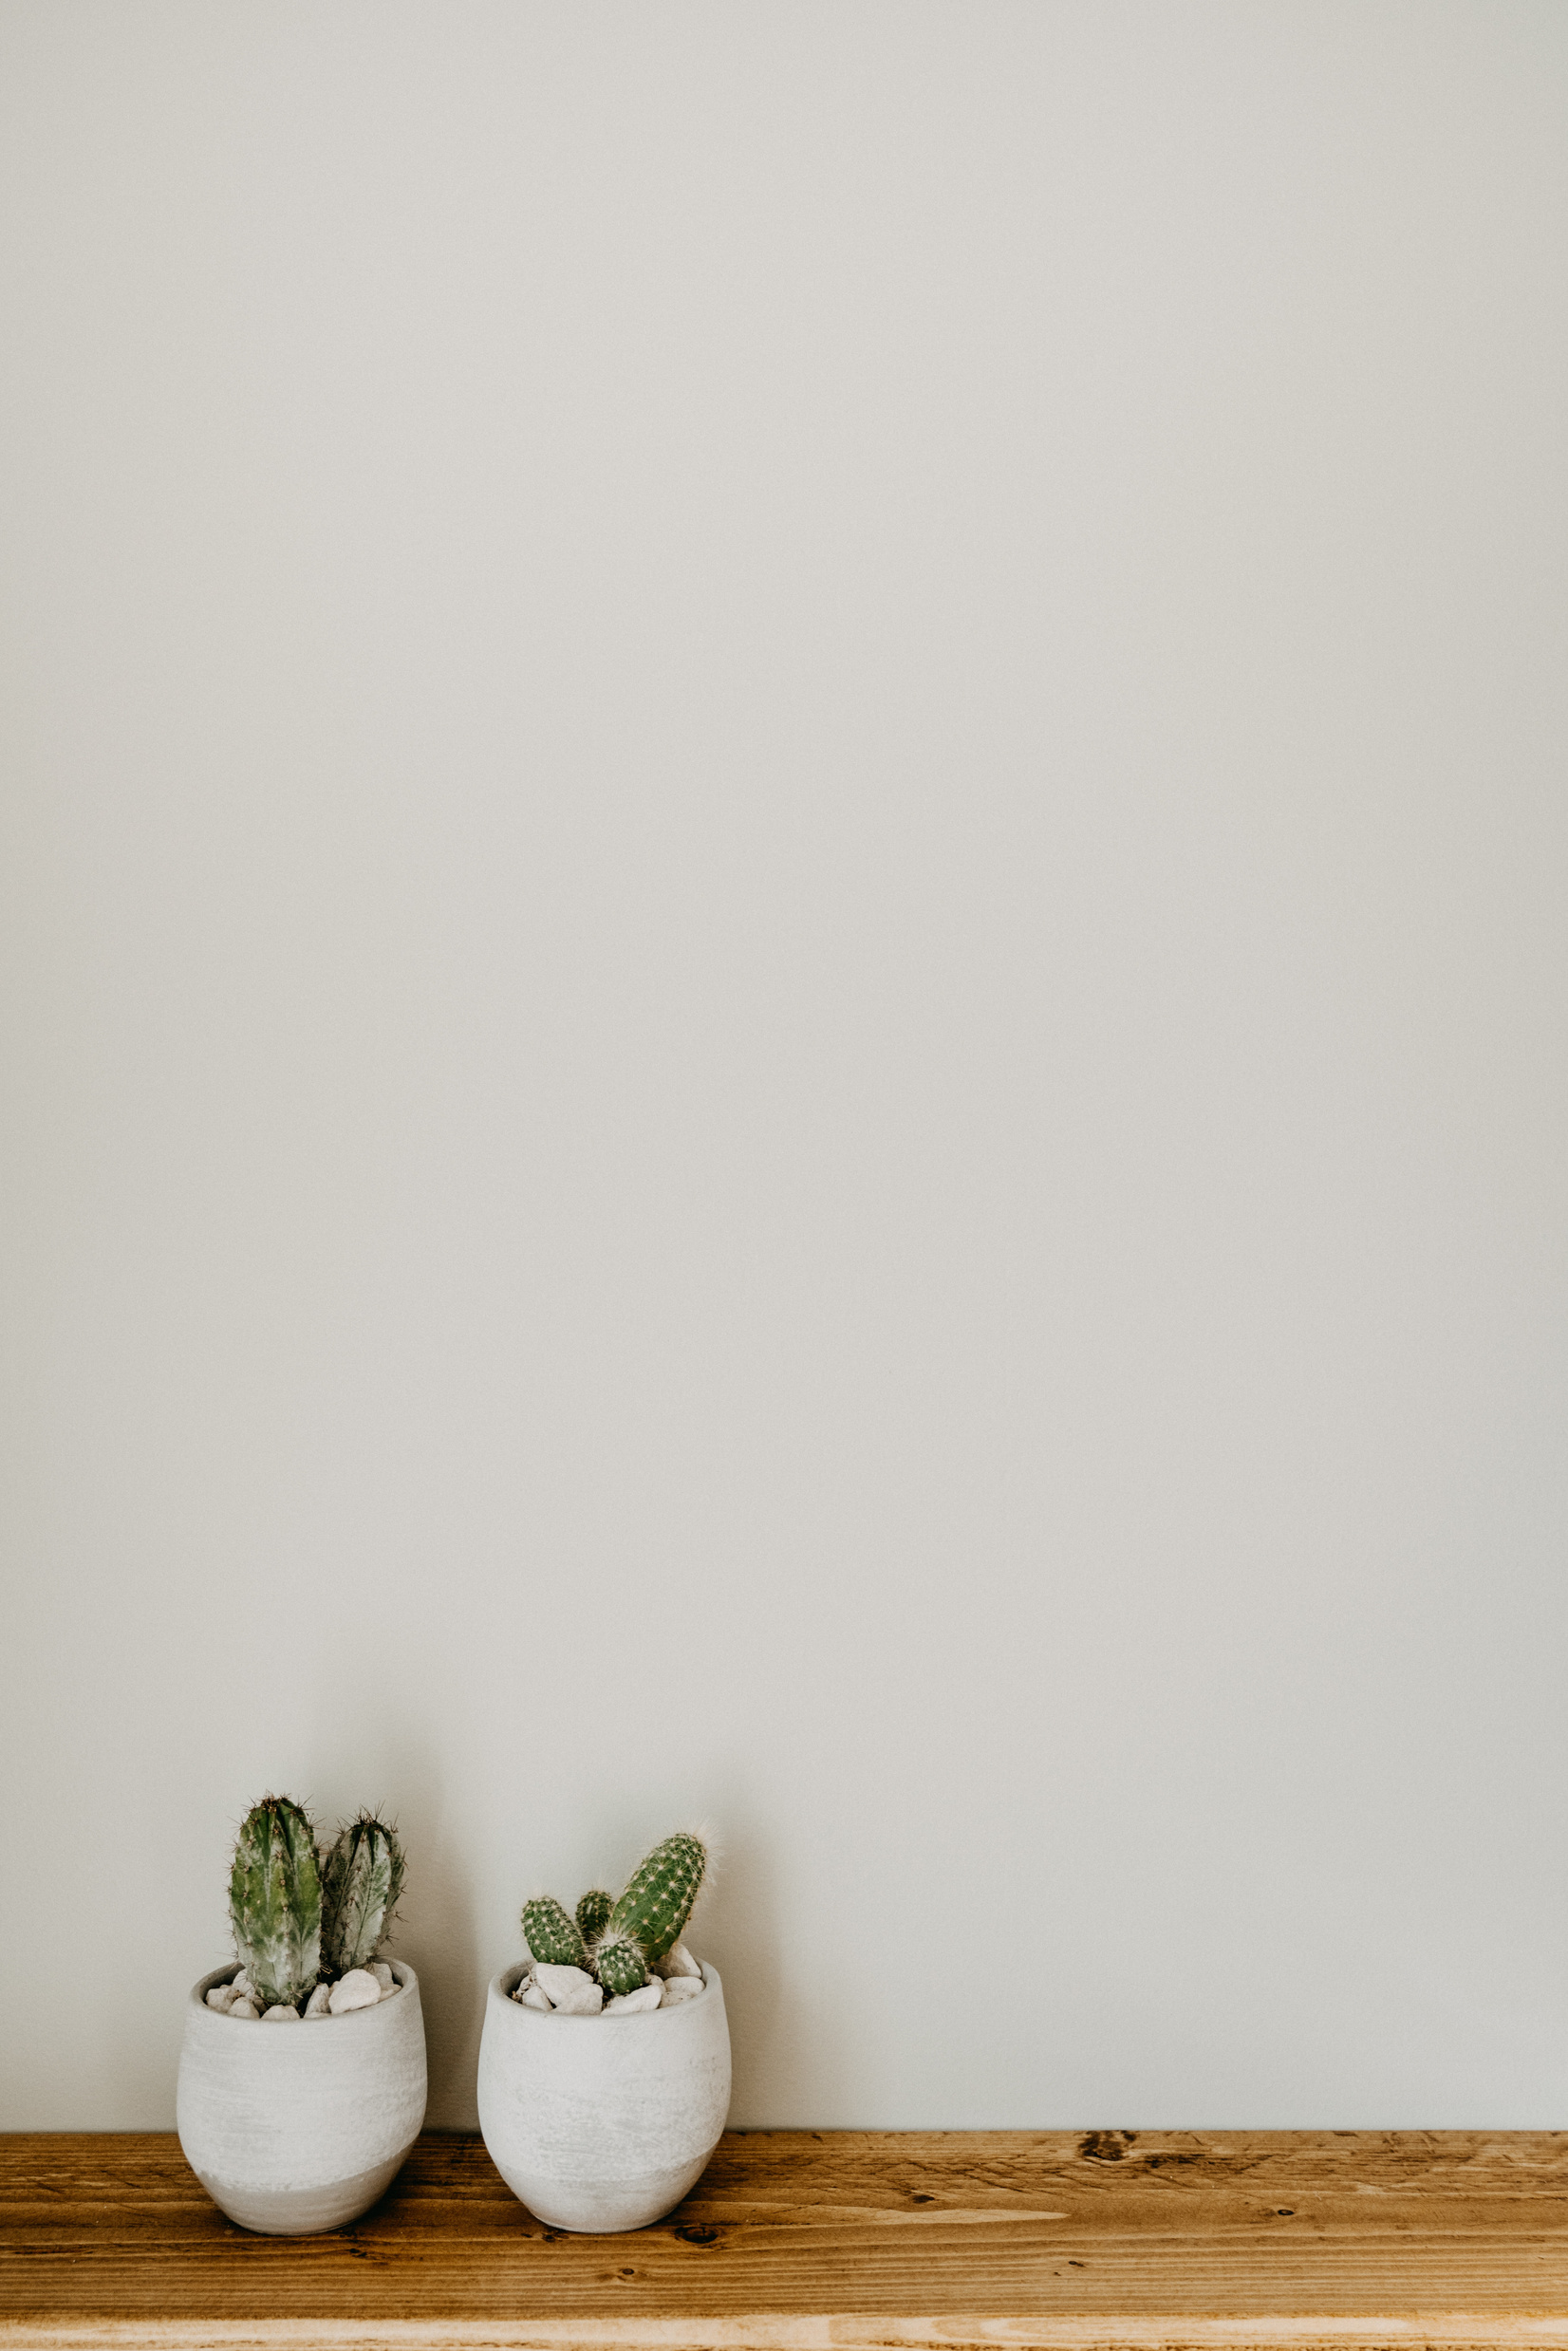 Portted Cacti on Shelf against White Wall